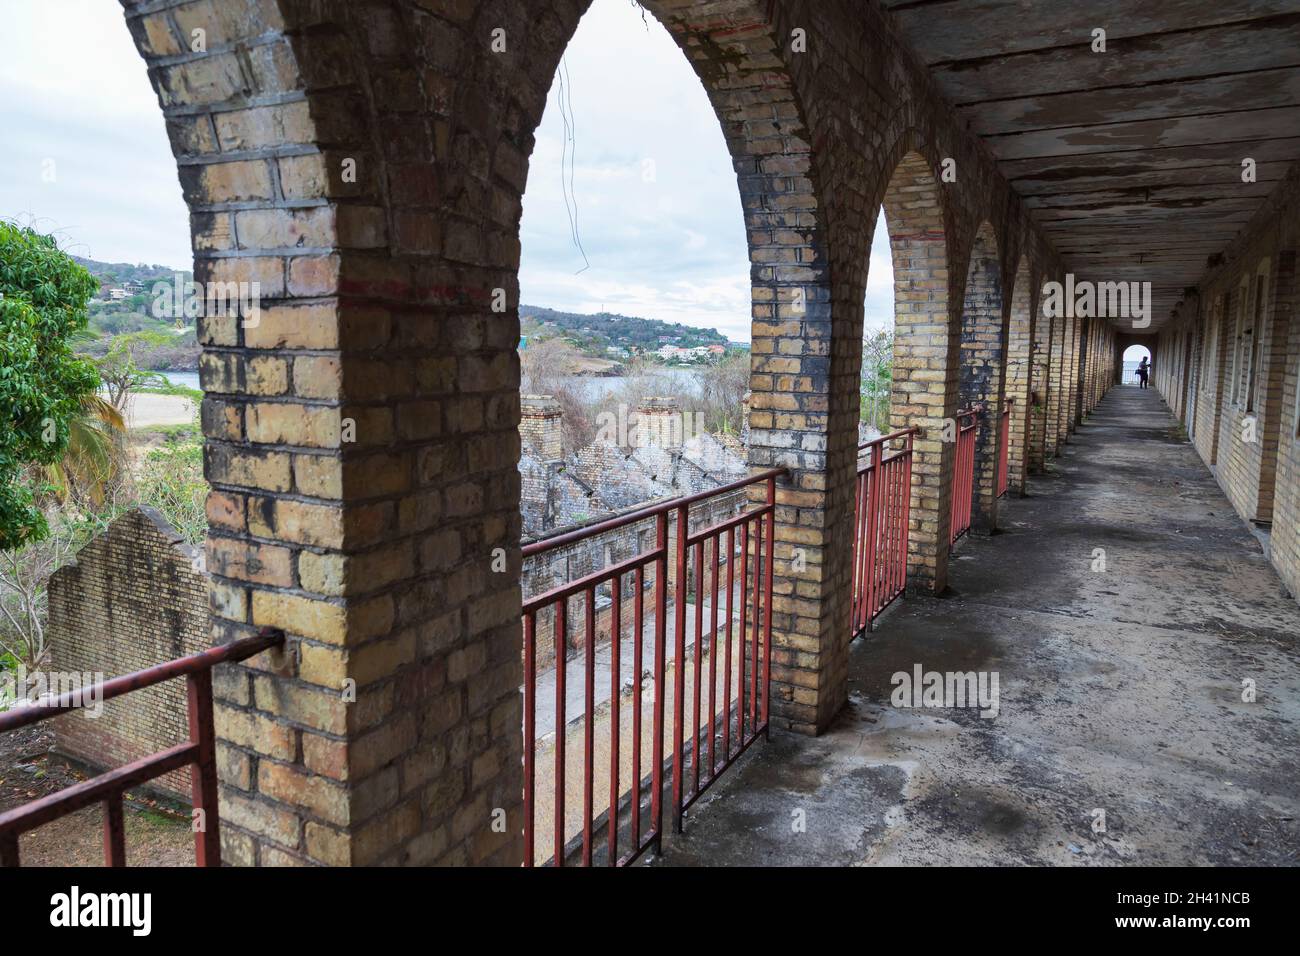 long corridor surrounded by arches and railings on the left Stock Photo